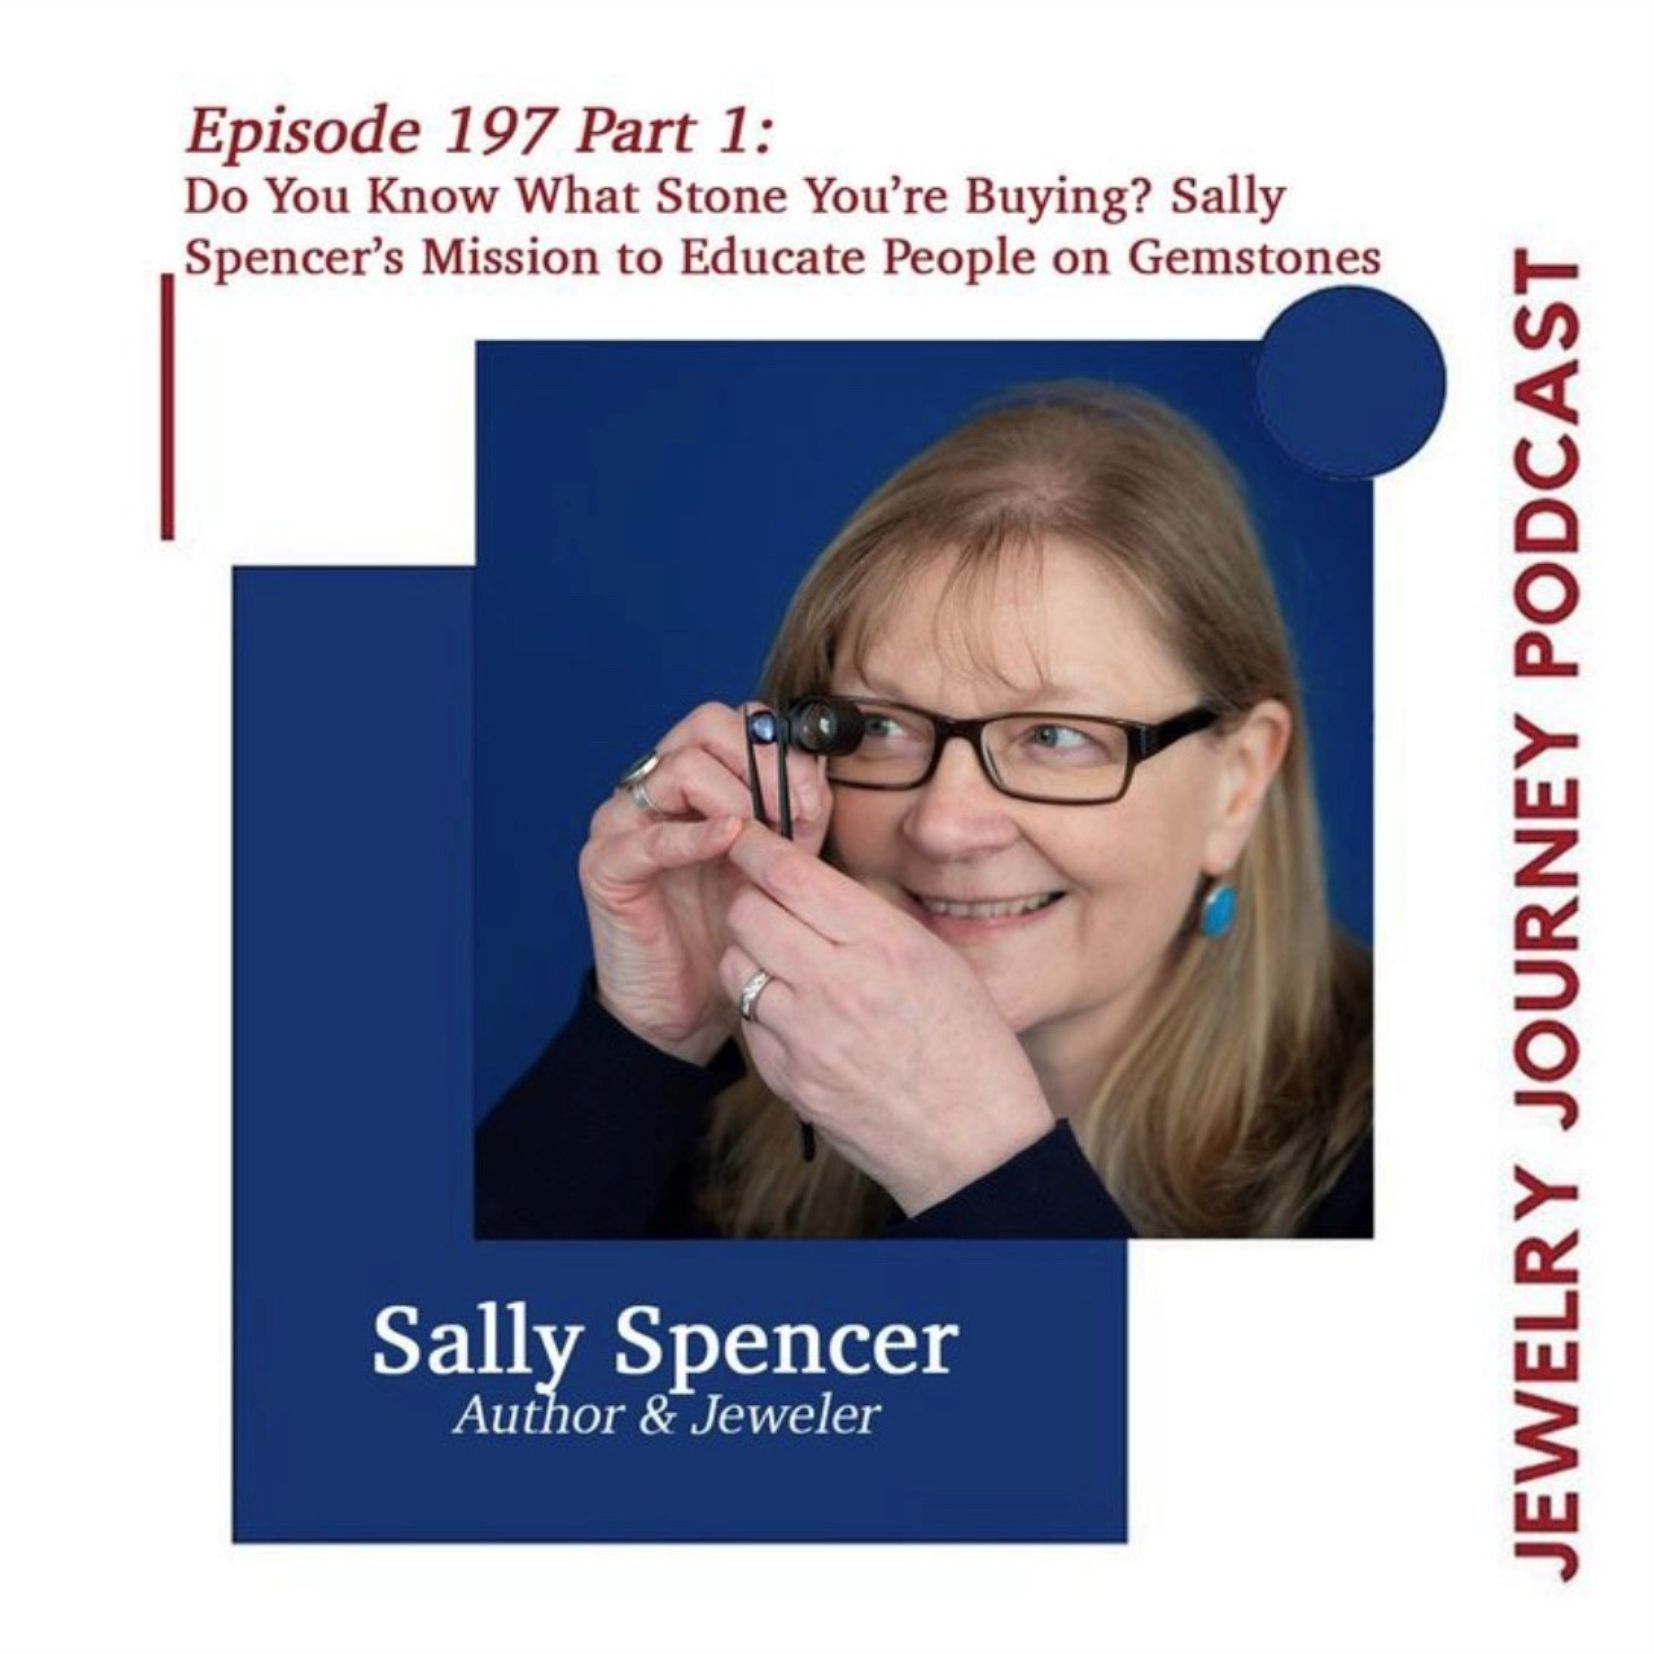 Sally Spencer guests on Jewelry Journey podcast